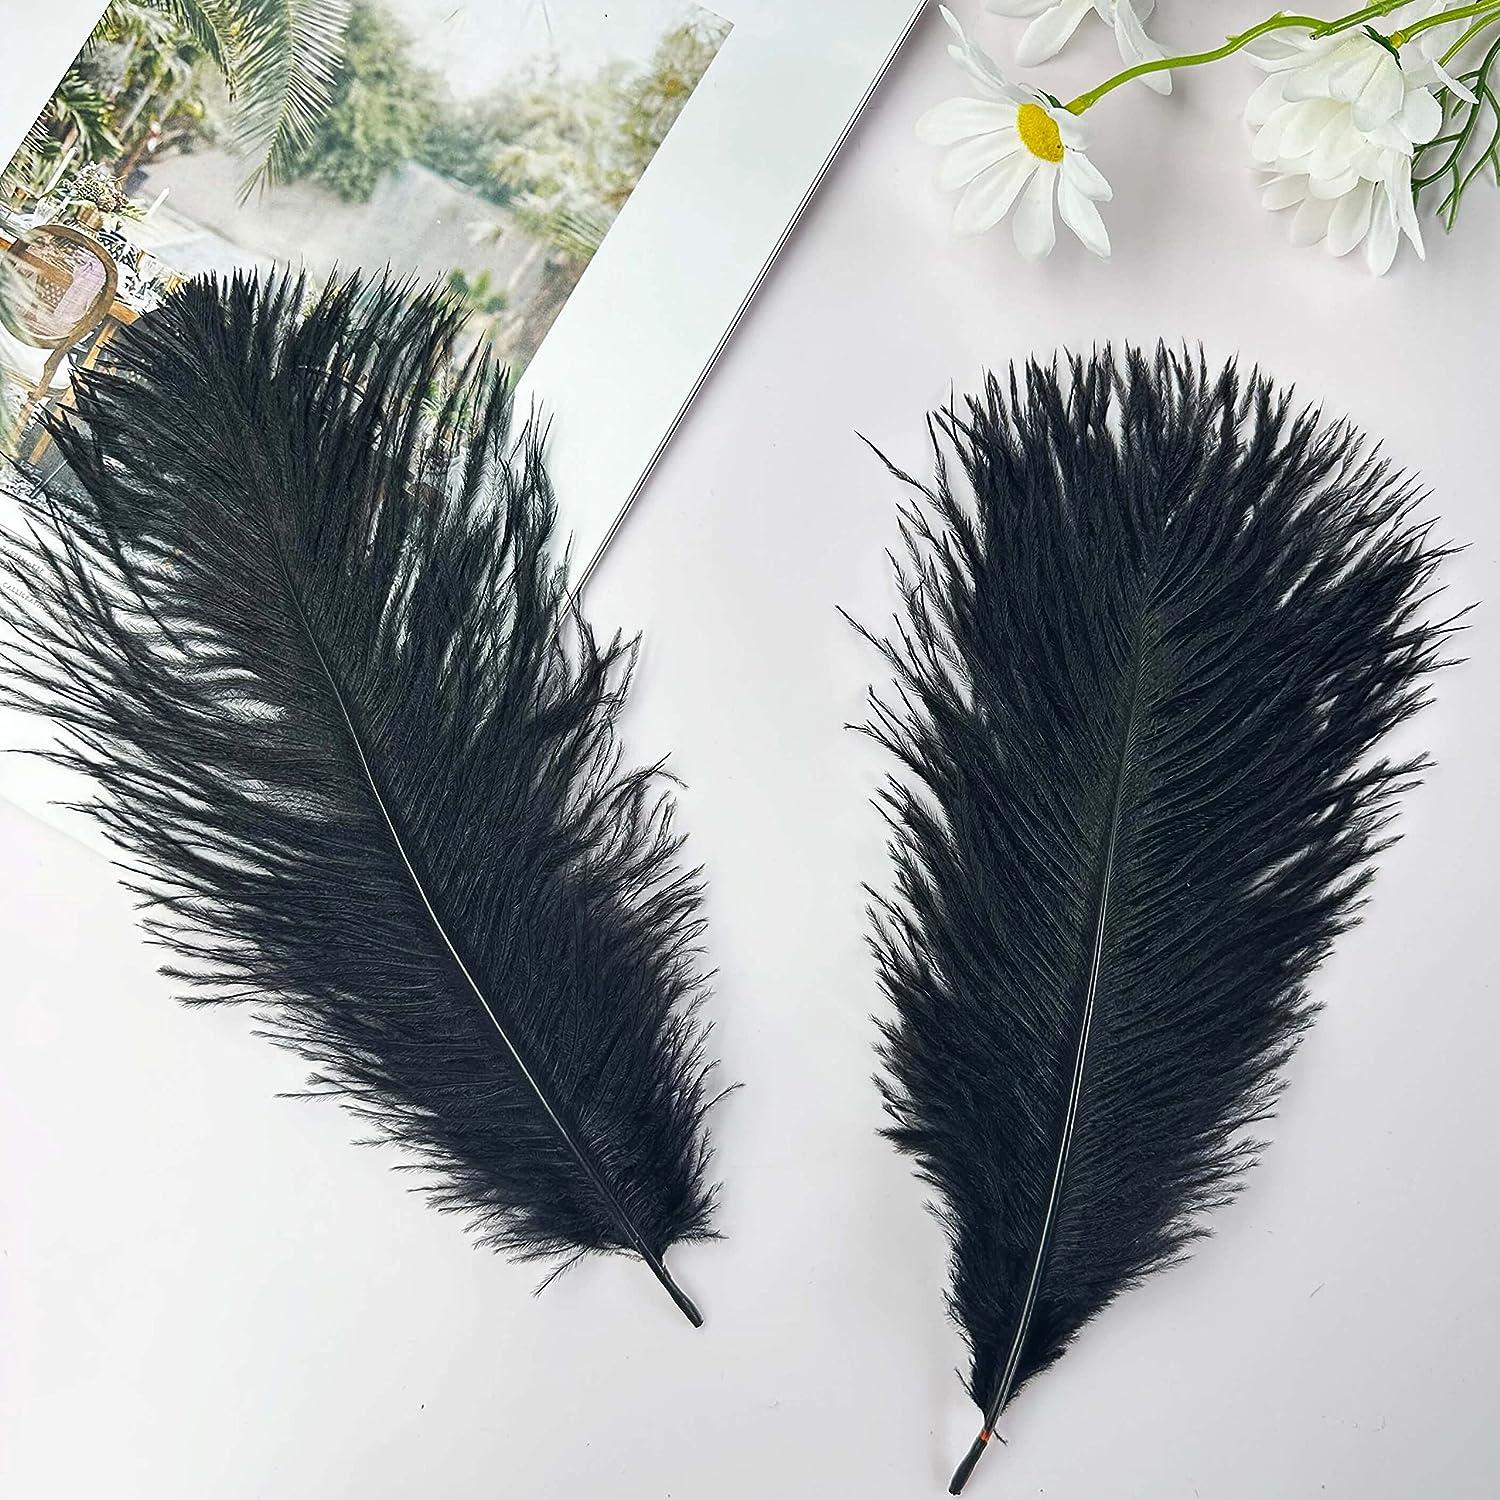 Piokio 20 pcs Natural Black Ostrich Feathers Plumes 8-10 inch(20